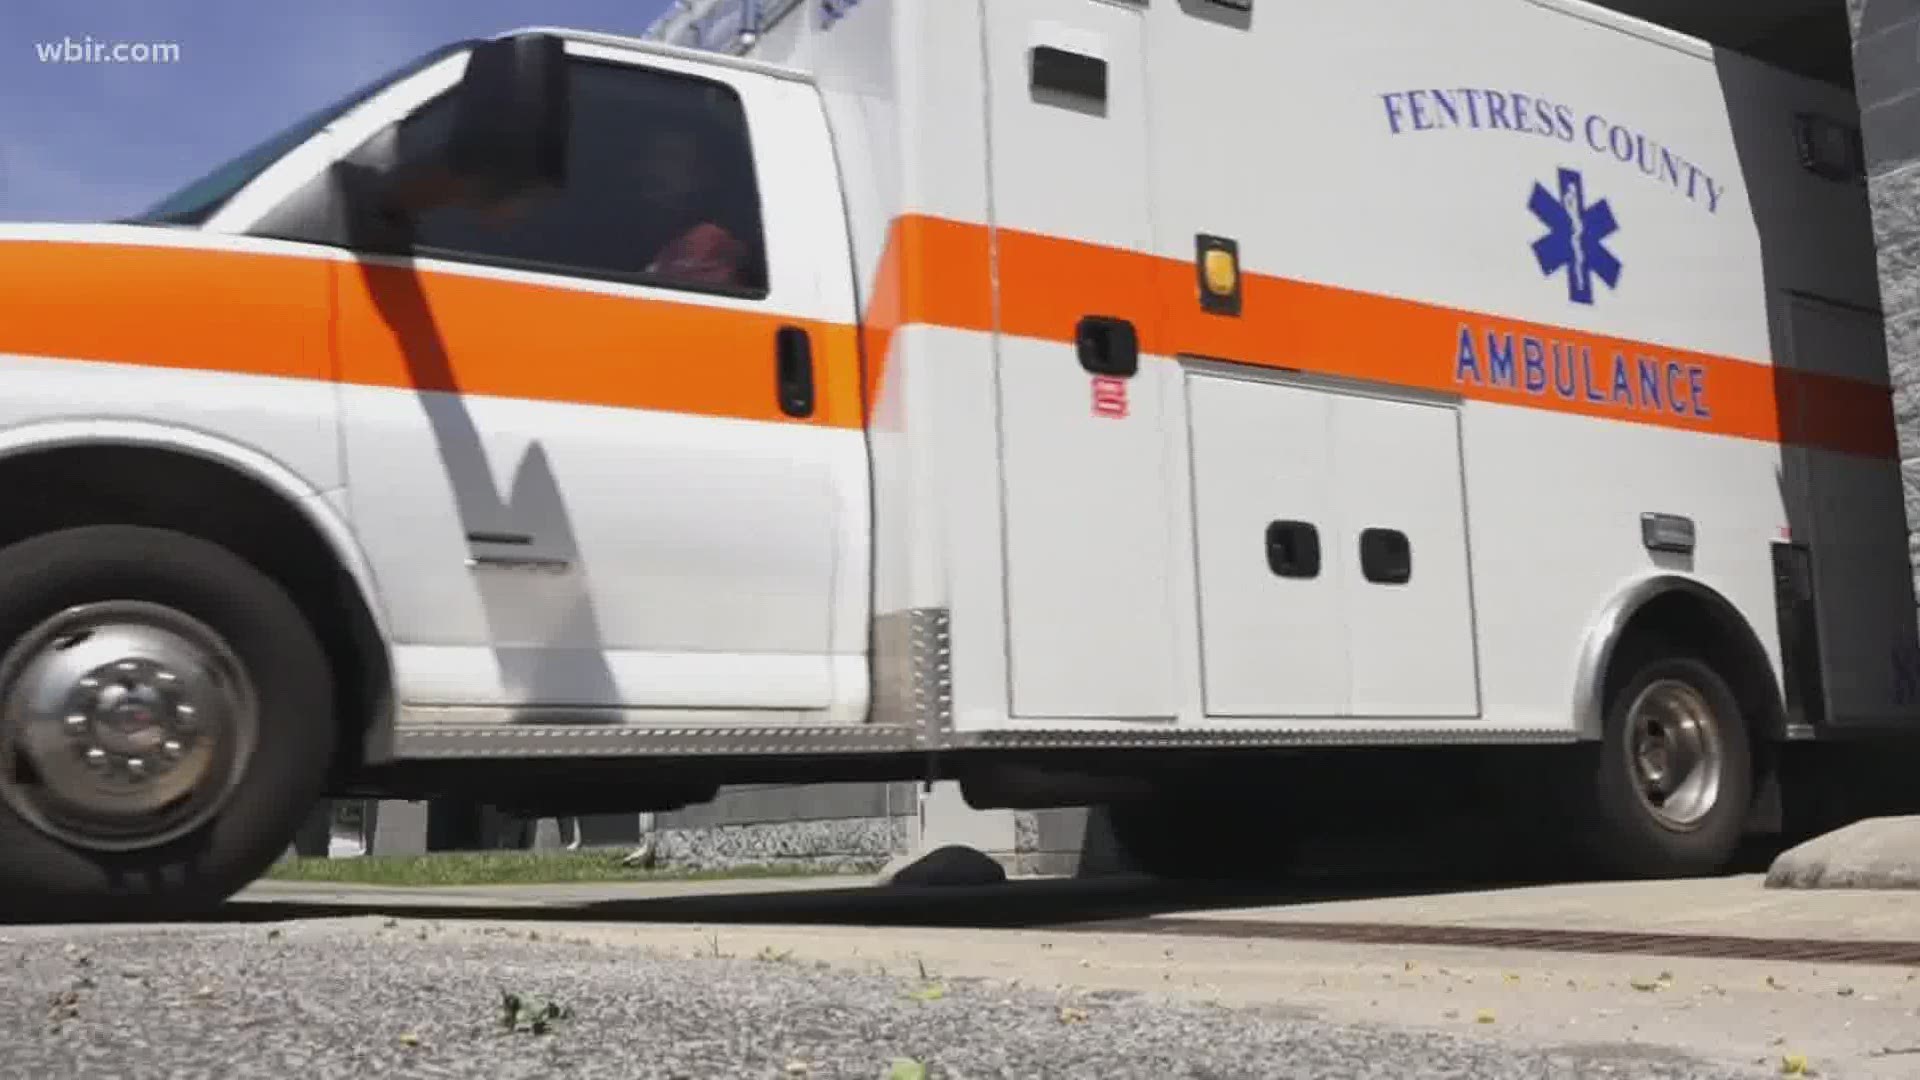 There is a new plan that could bring emergency care to Fentress County, and provide a model for rural areas across the country.